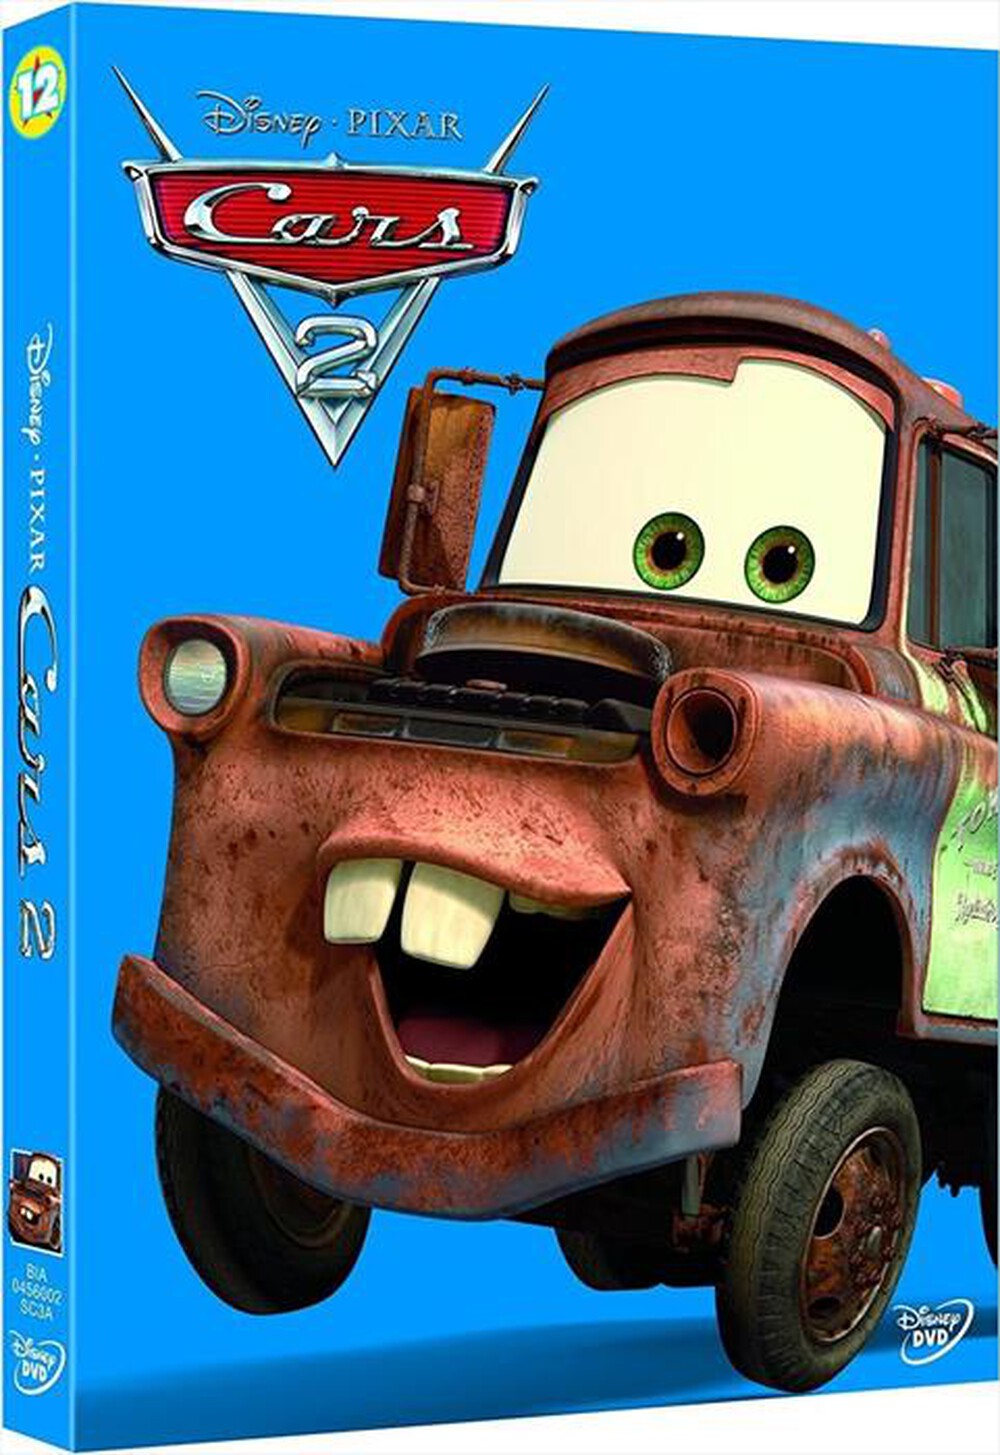 "EAGLE PICTURES - Cars 2 (SE)"